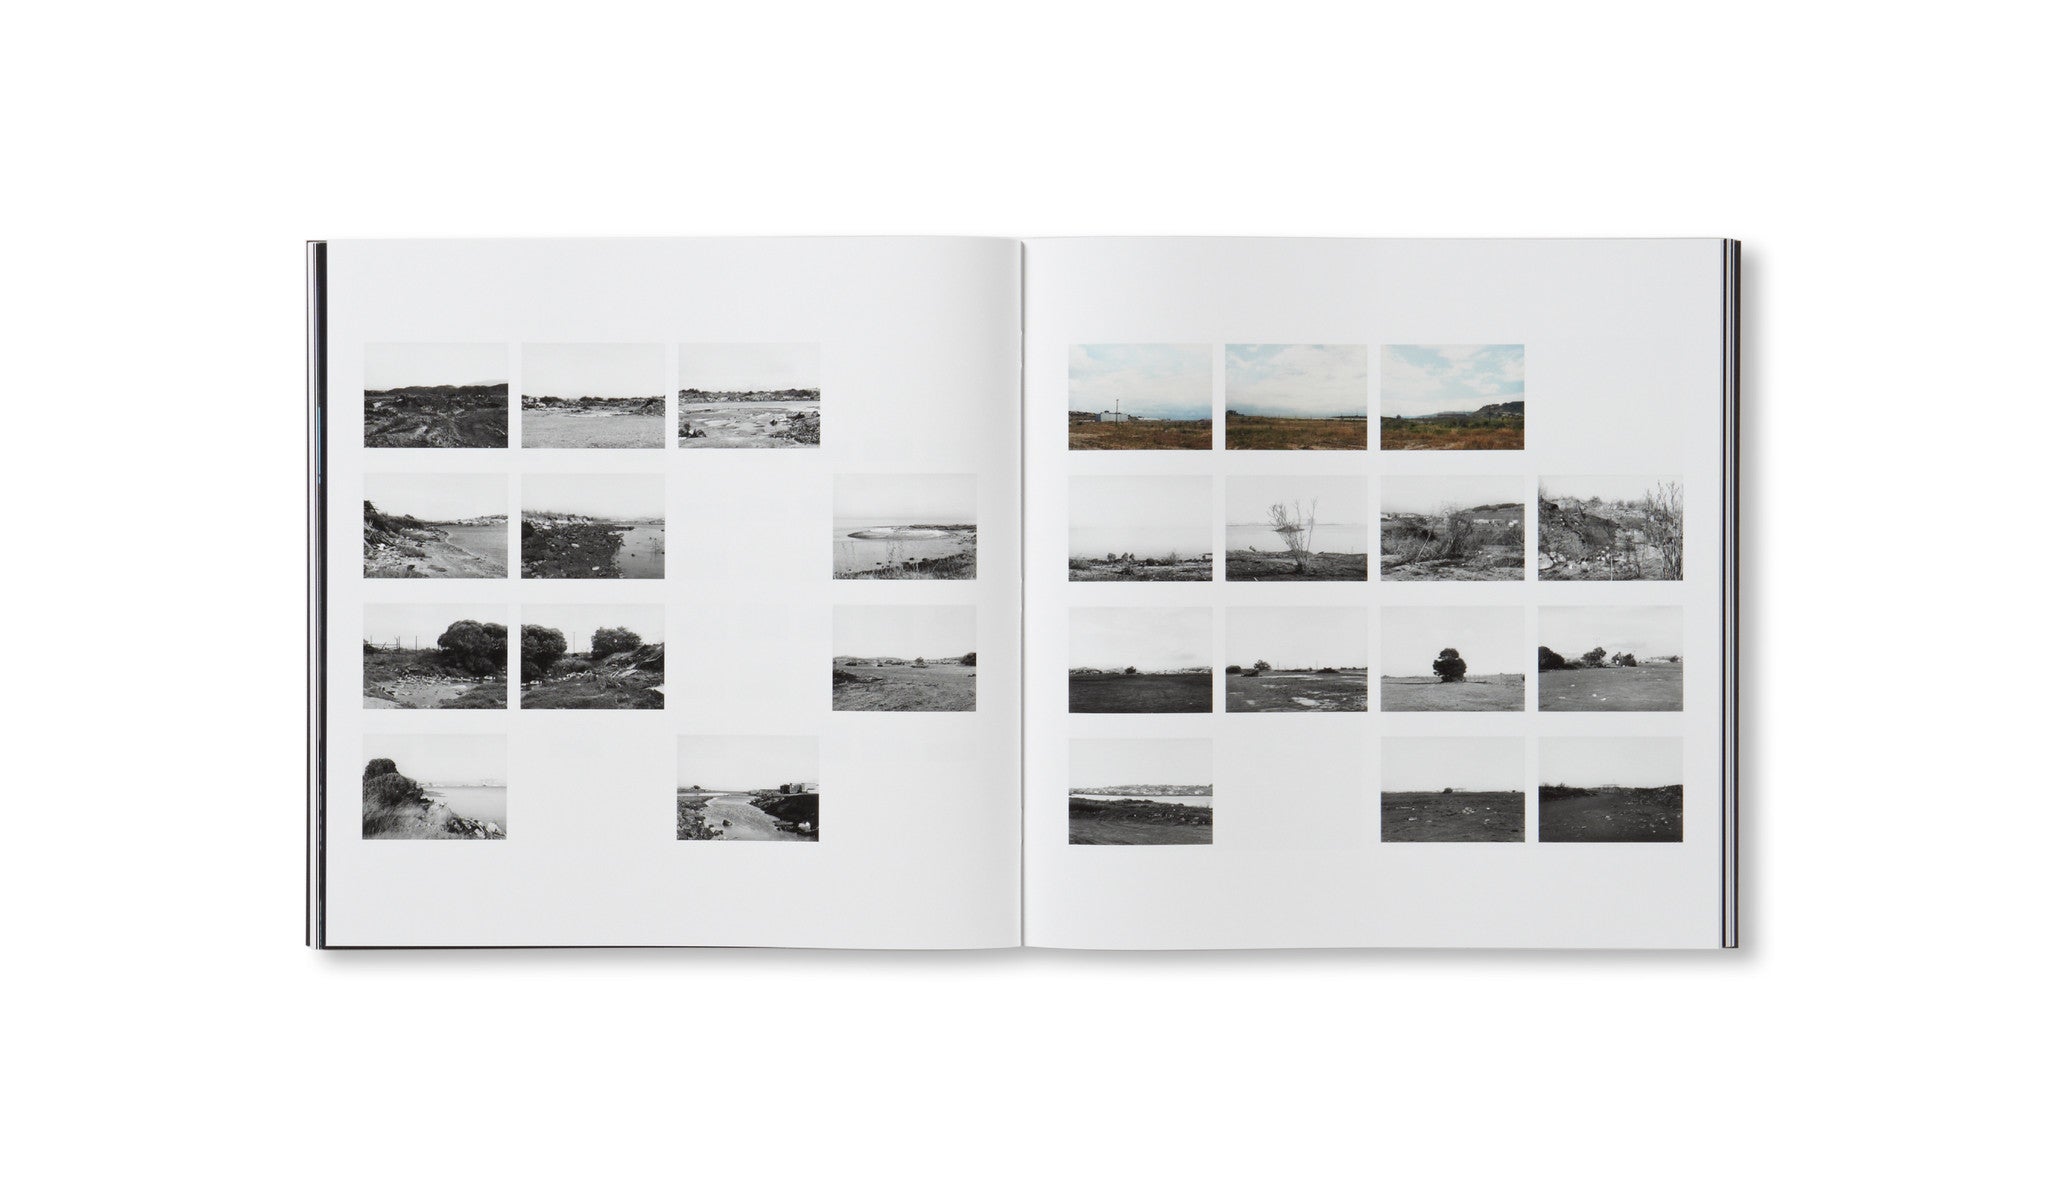 COMMON OBJECTS by Lewis Baltz